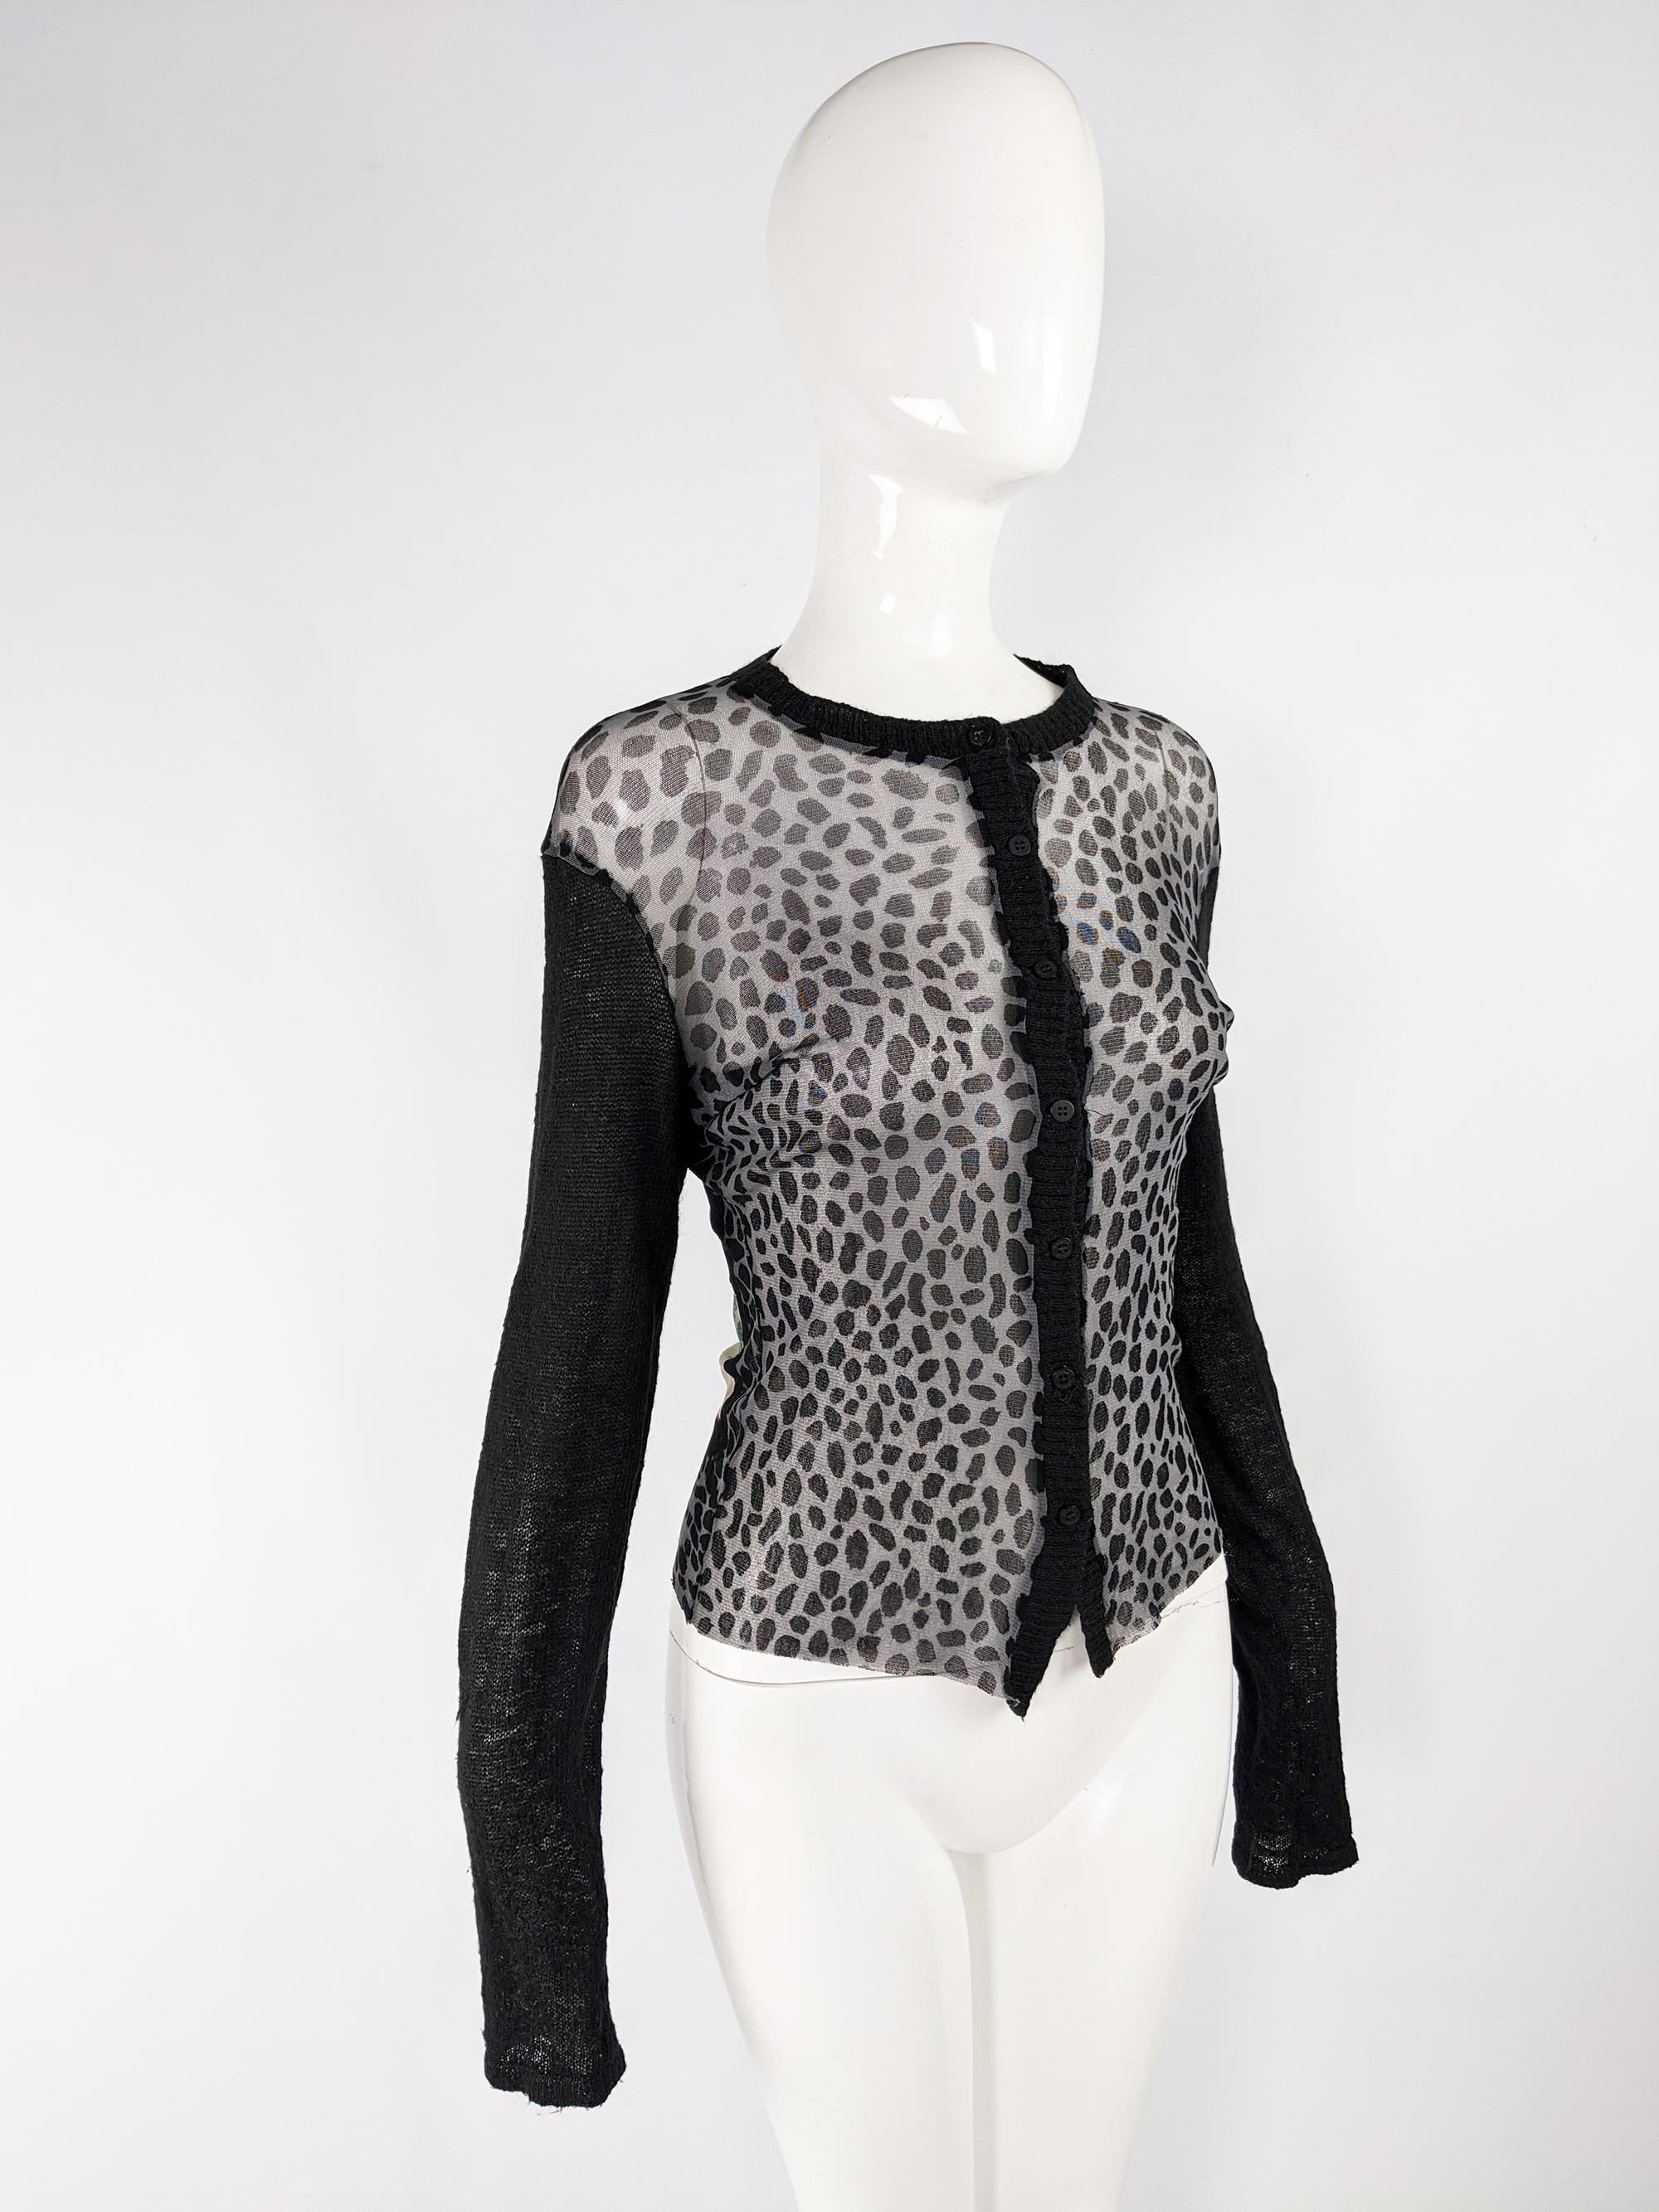 Kenzo Vintage Sheer Mesh Leopard Print Cardigan Sweater In Good Condition In Doncaster, South Yorkshire